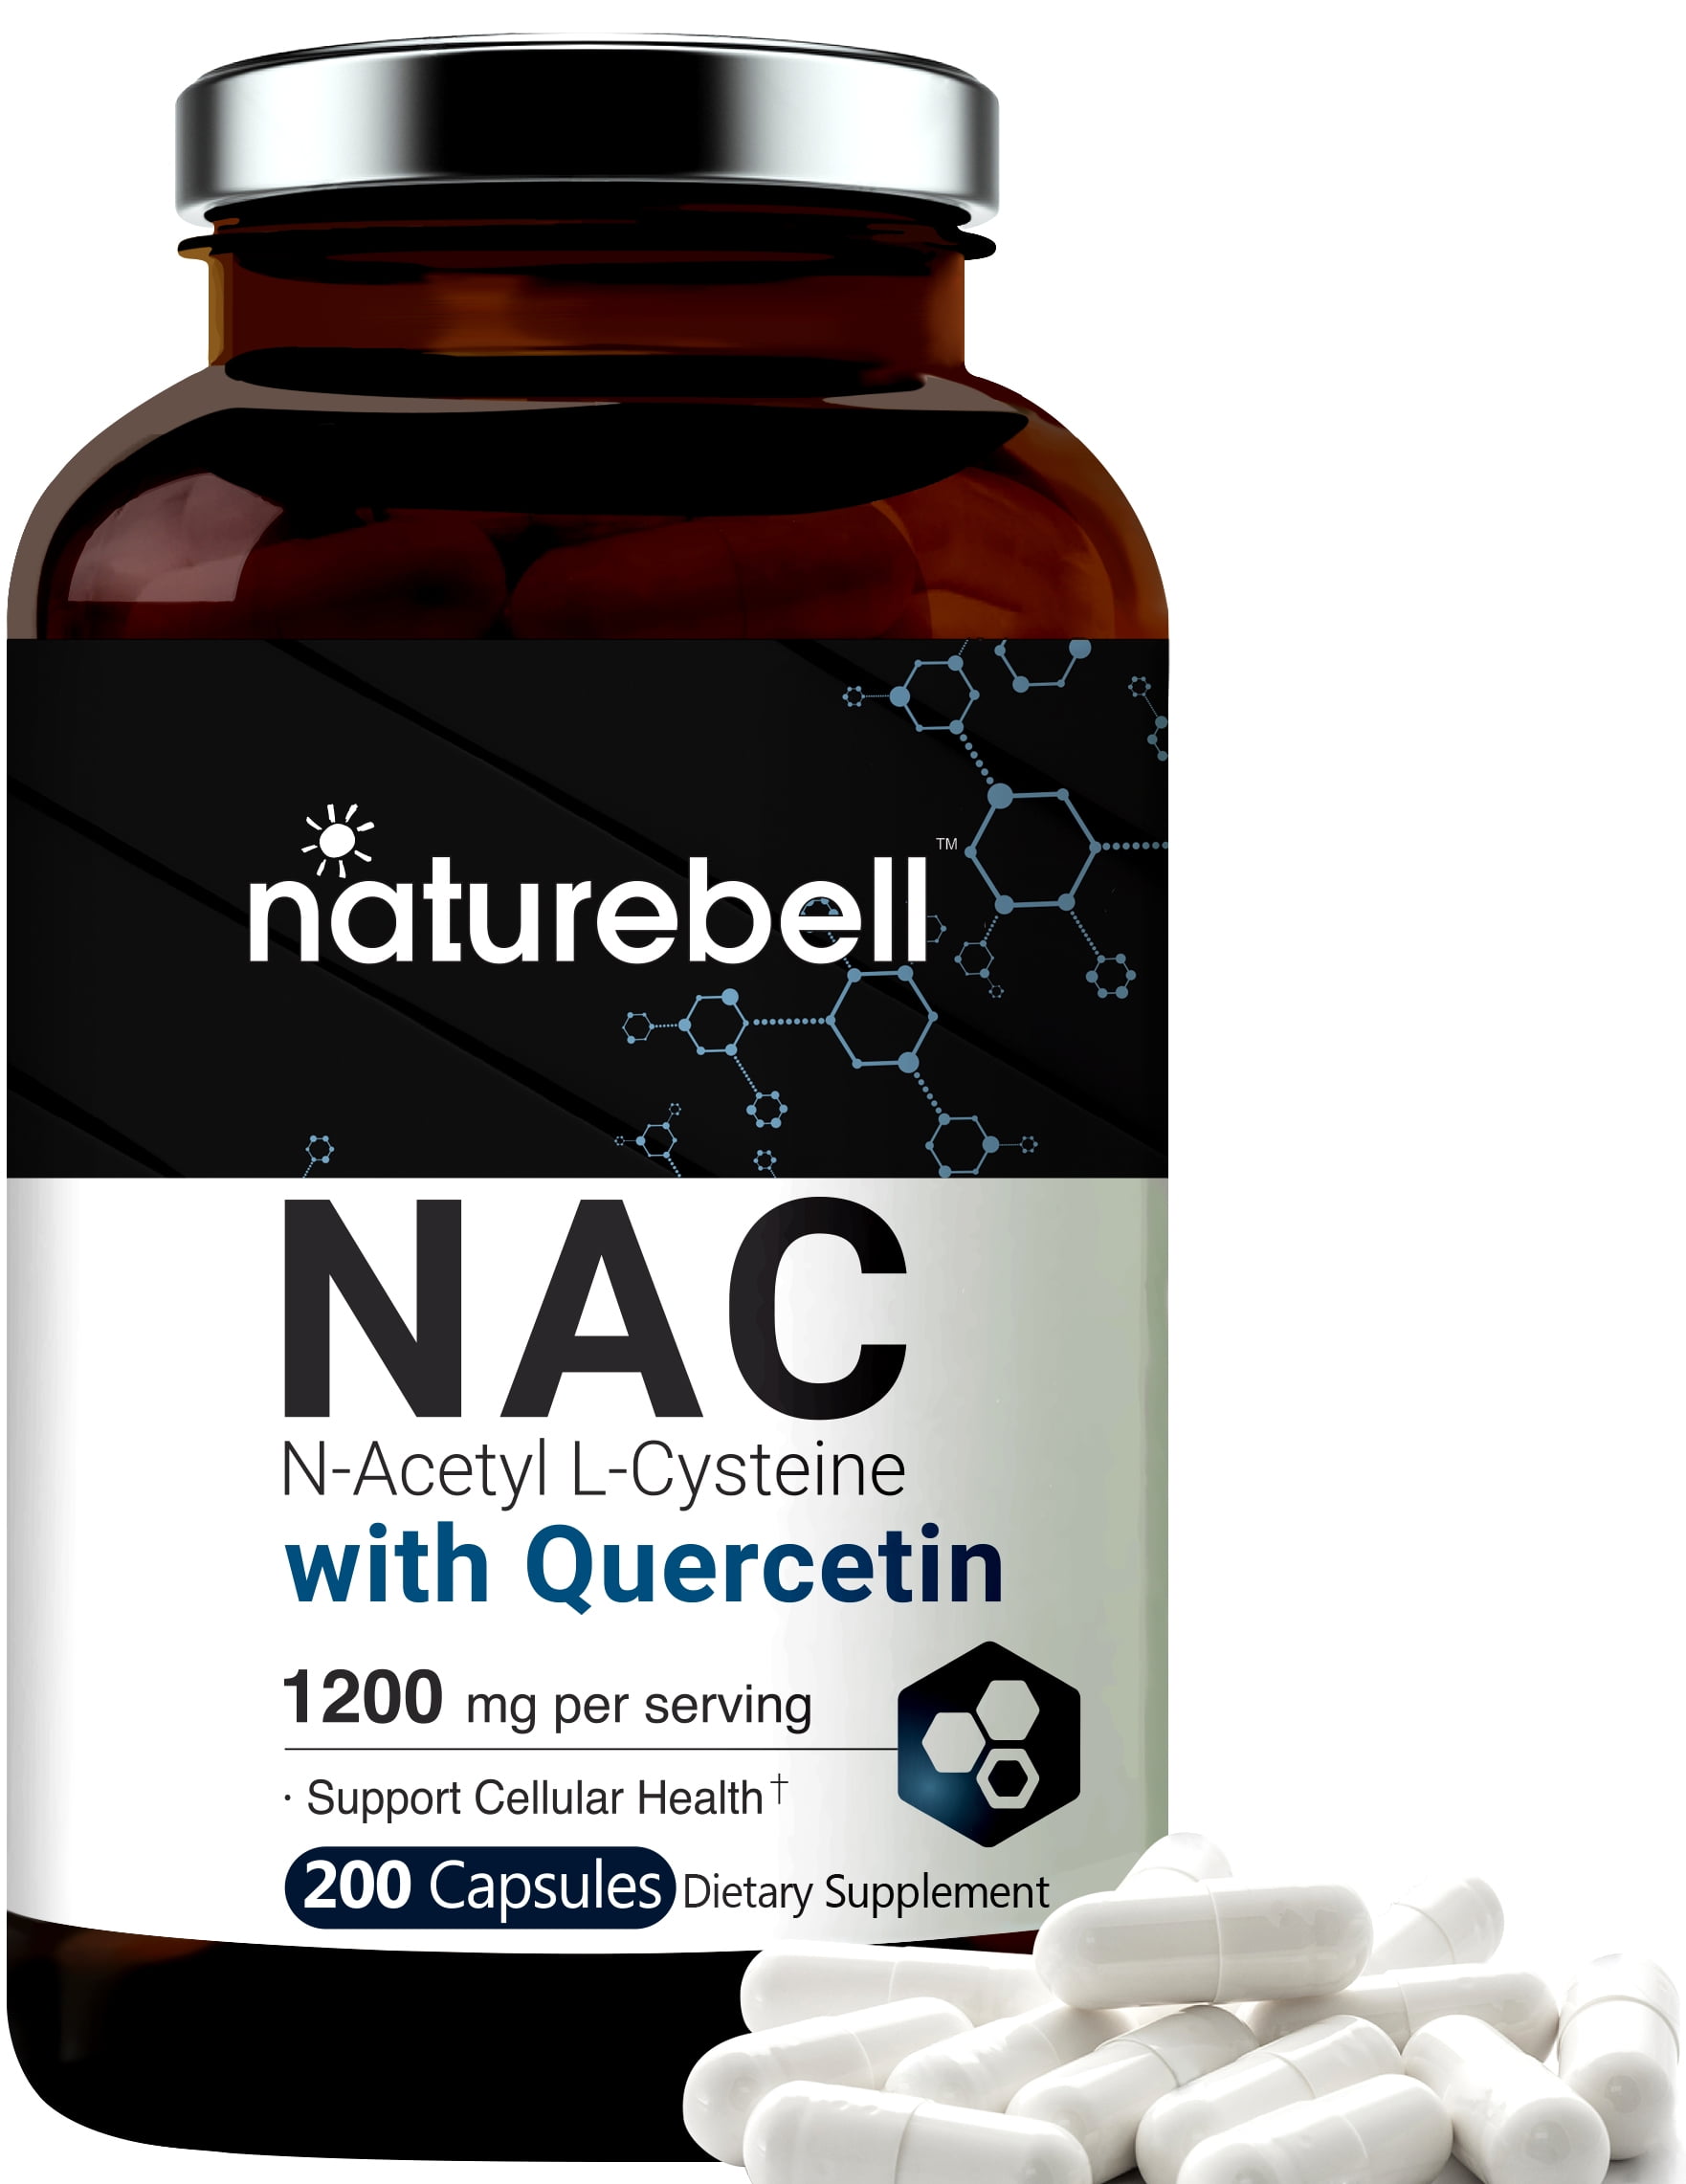 Naturebell Nac 10mg 0 Capsules Fortified With Quercetin Double Strength N Acetyl L Cysteine Third Party Tested Walmart Com